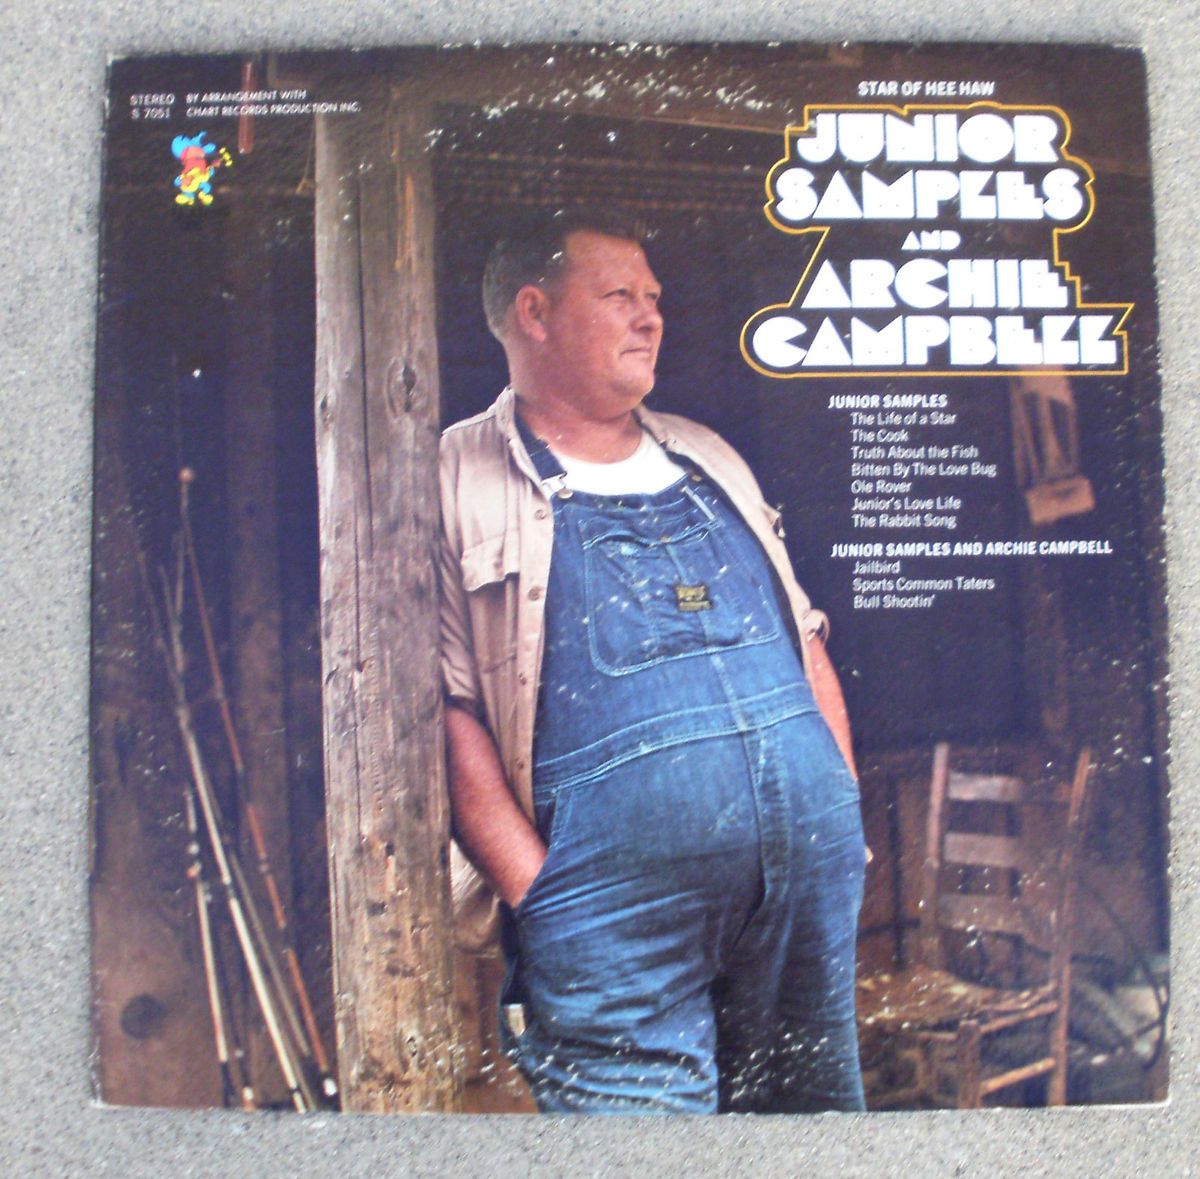 Junior Samples and Archie Campbell Comedy Album Hee Haw